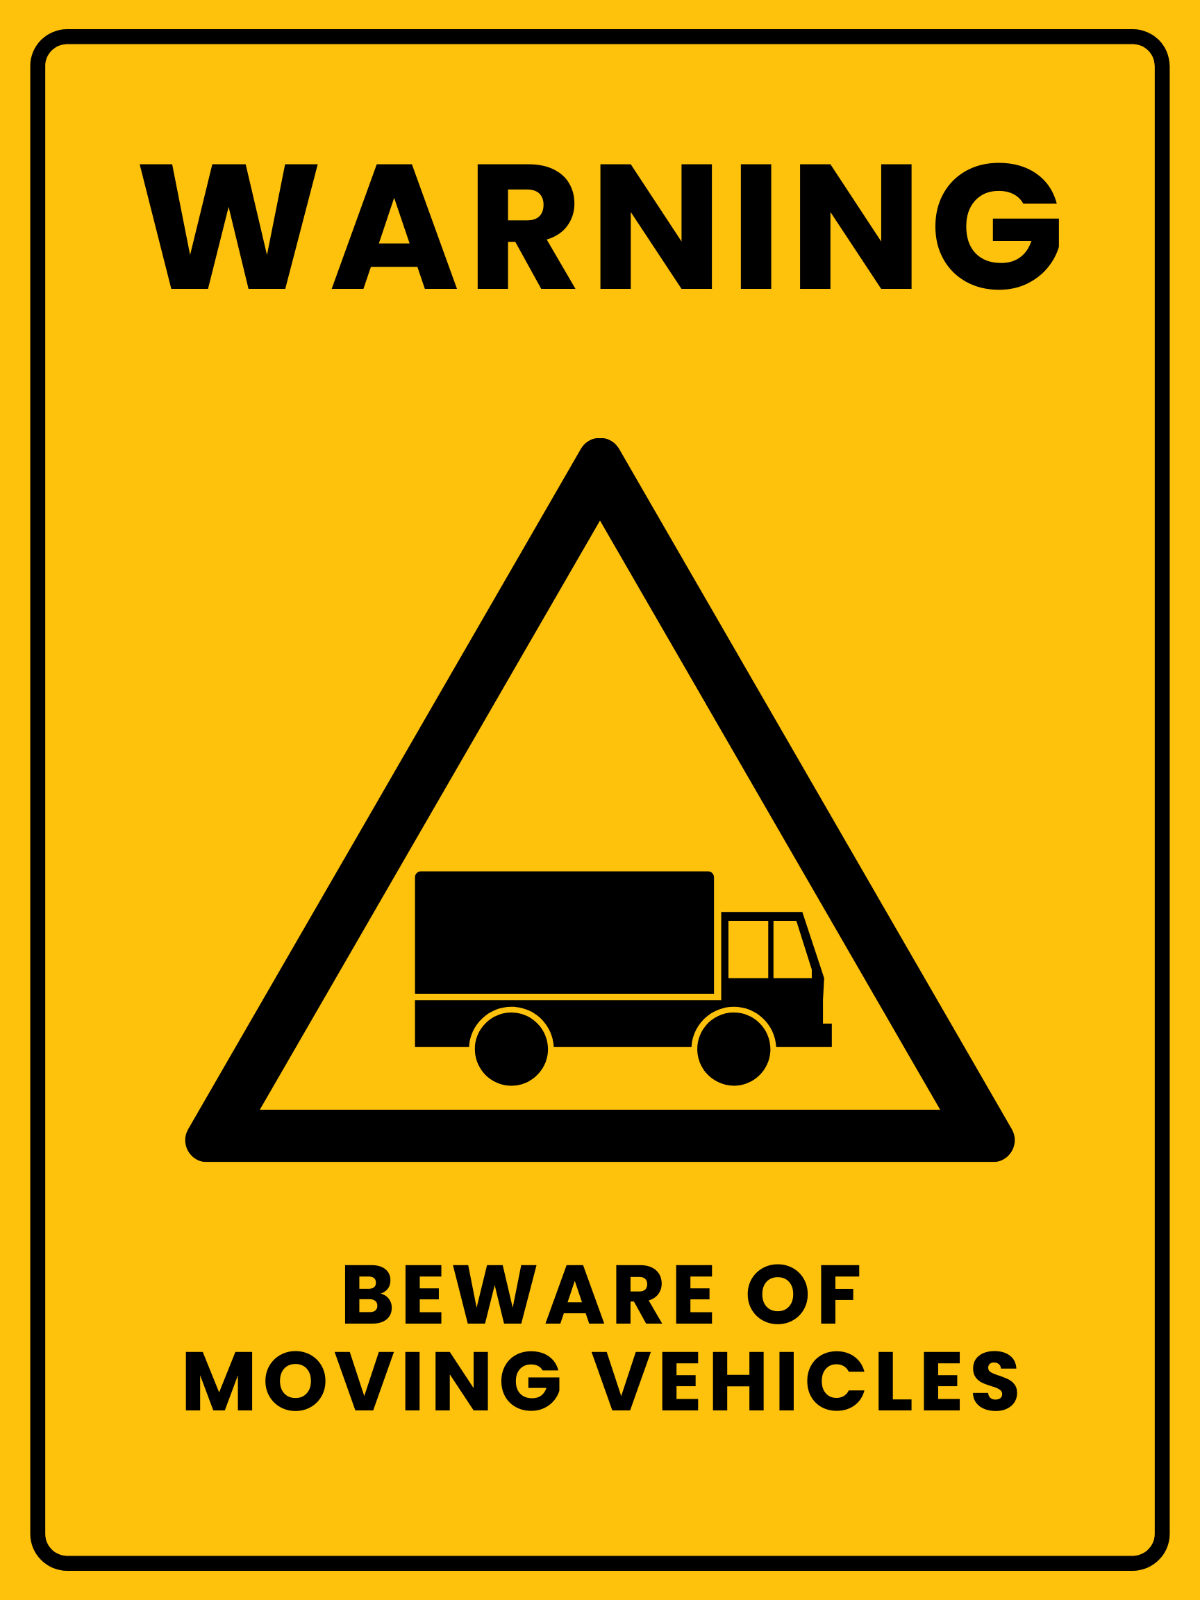 Warning Beware of Vehicle Moving Sign Template